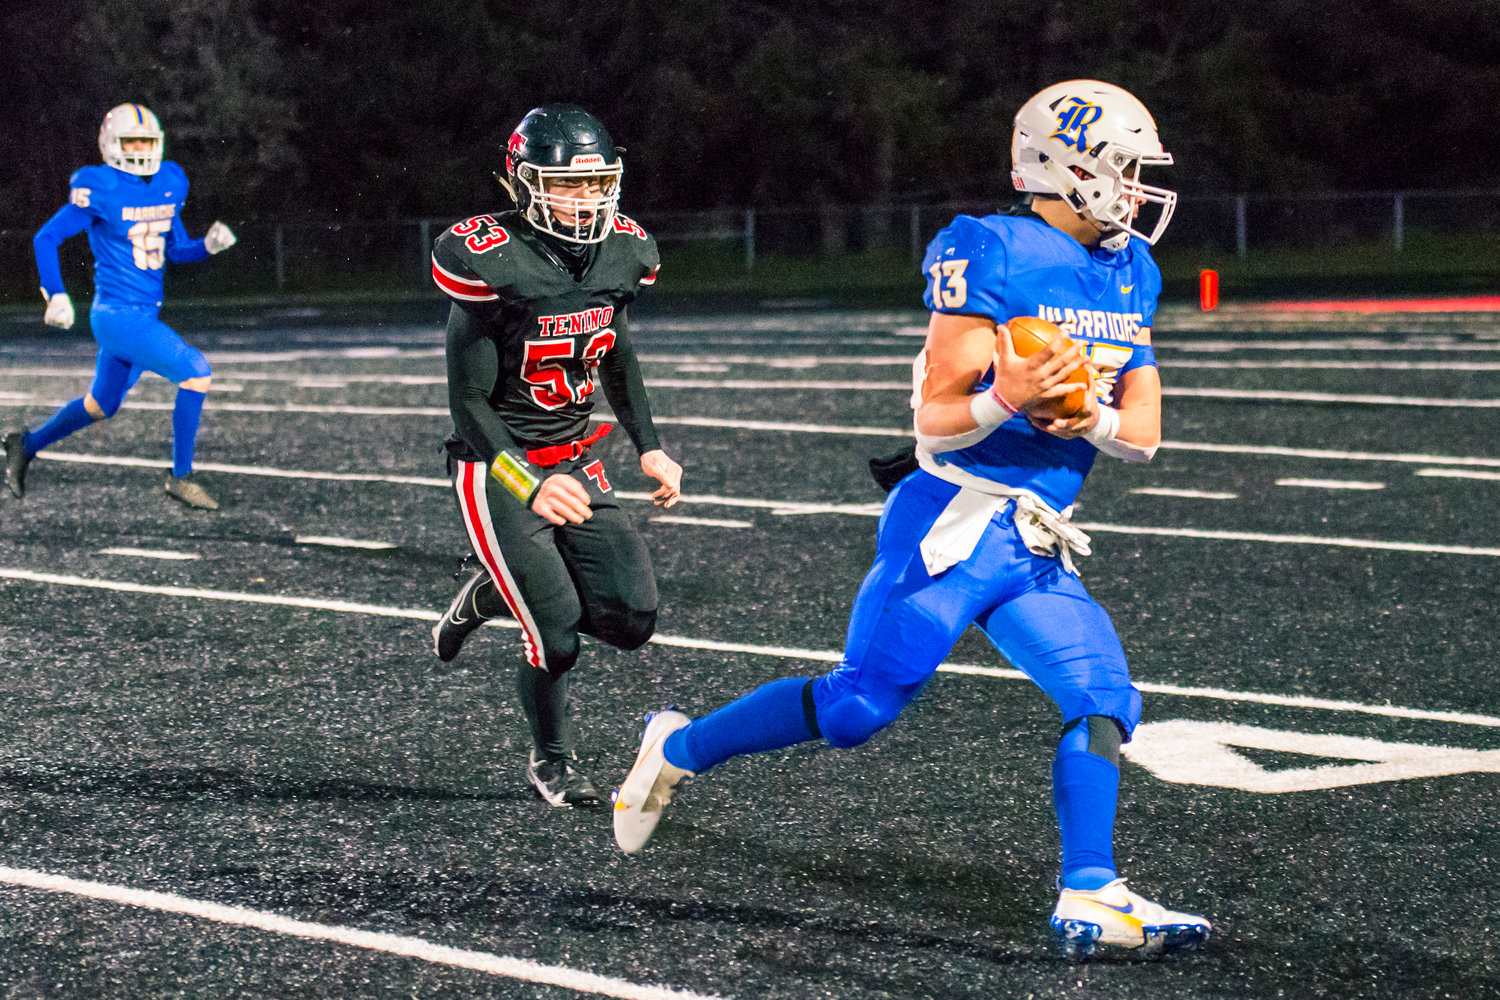 Rochester's Eddie Burkhardt Jr. (13) makes a reception during a game against Tenino Friday night.